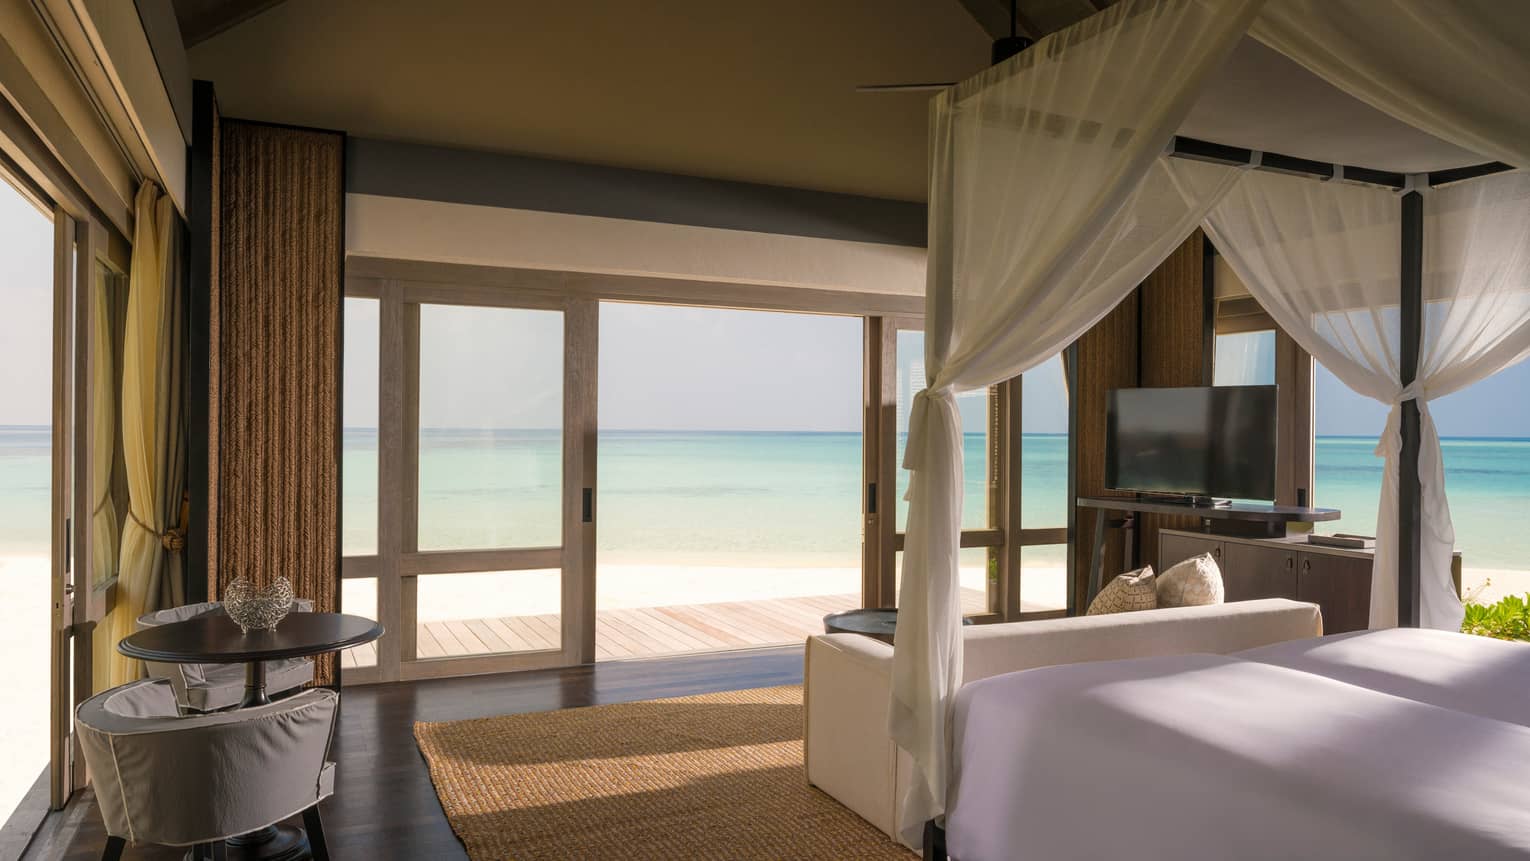 Beach Villa bedroom with white canopy bed by sliding doors to patio, lagoon views